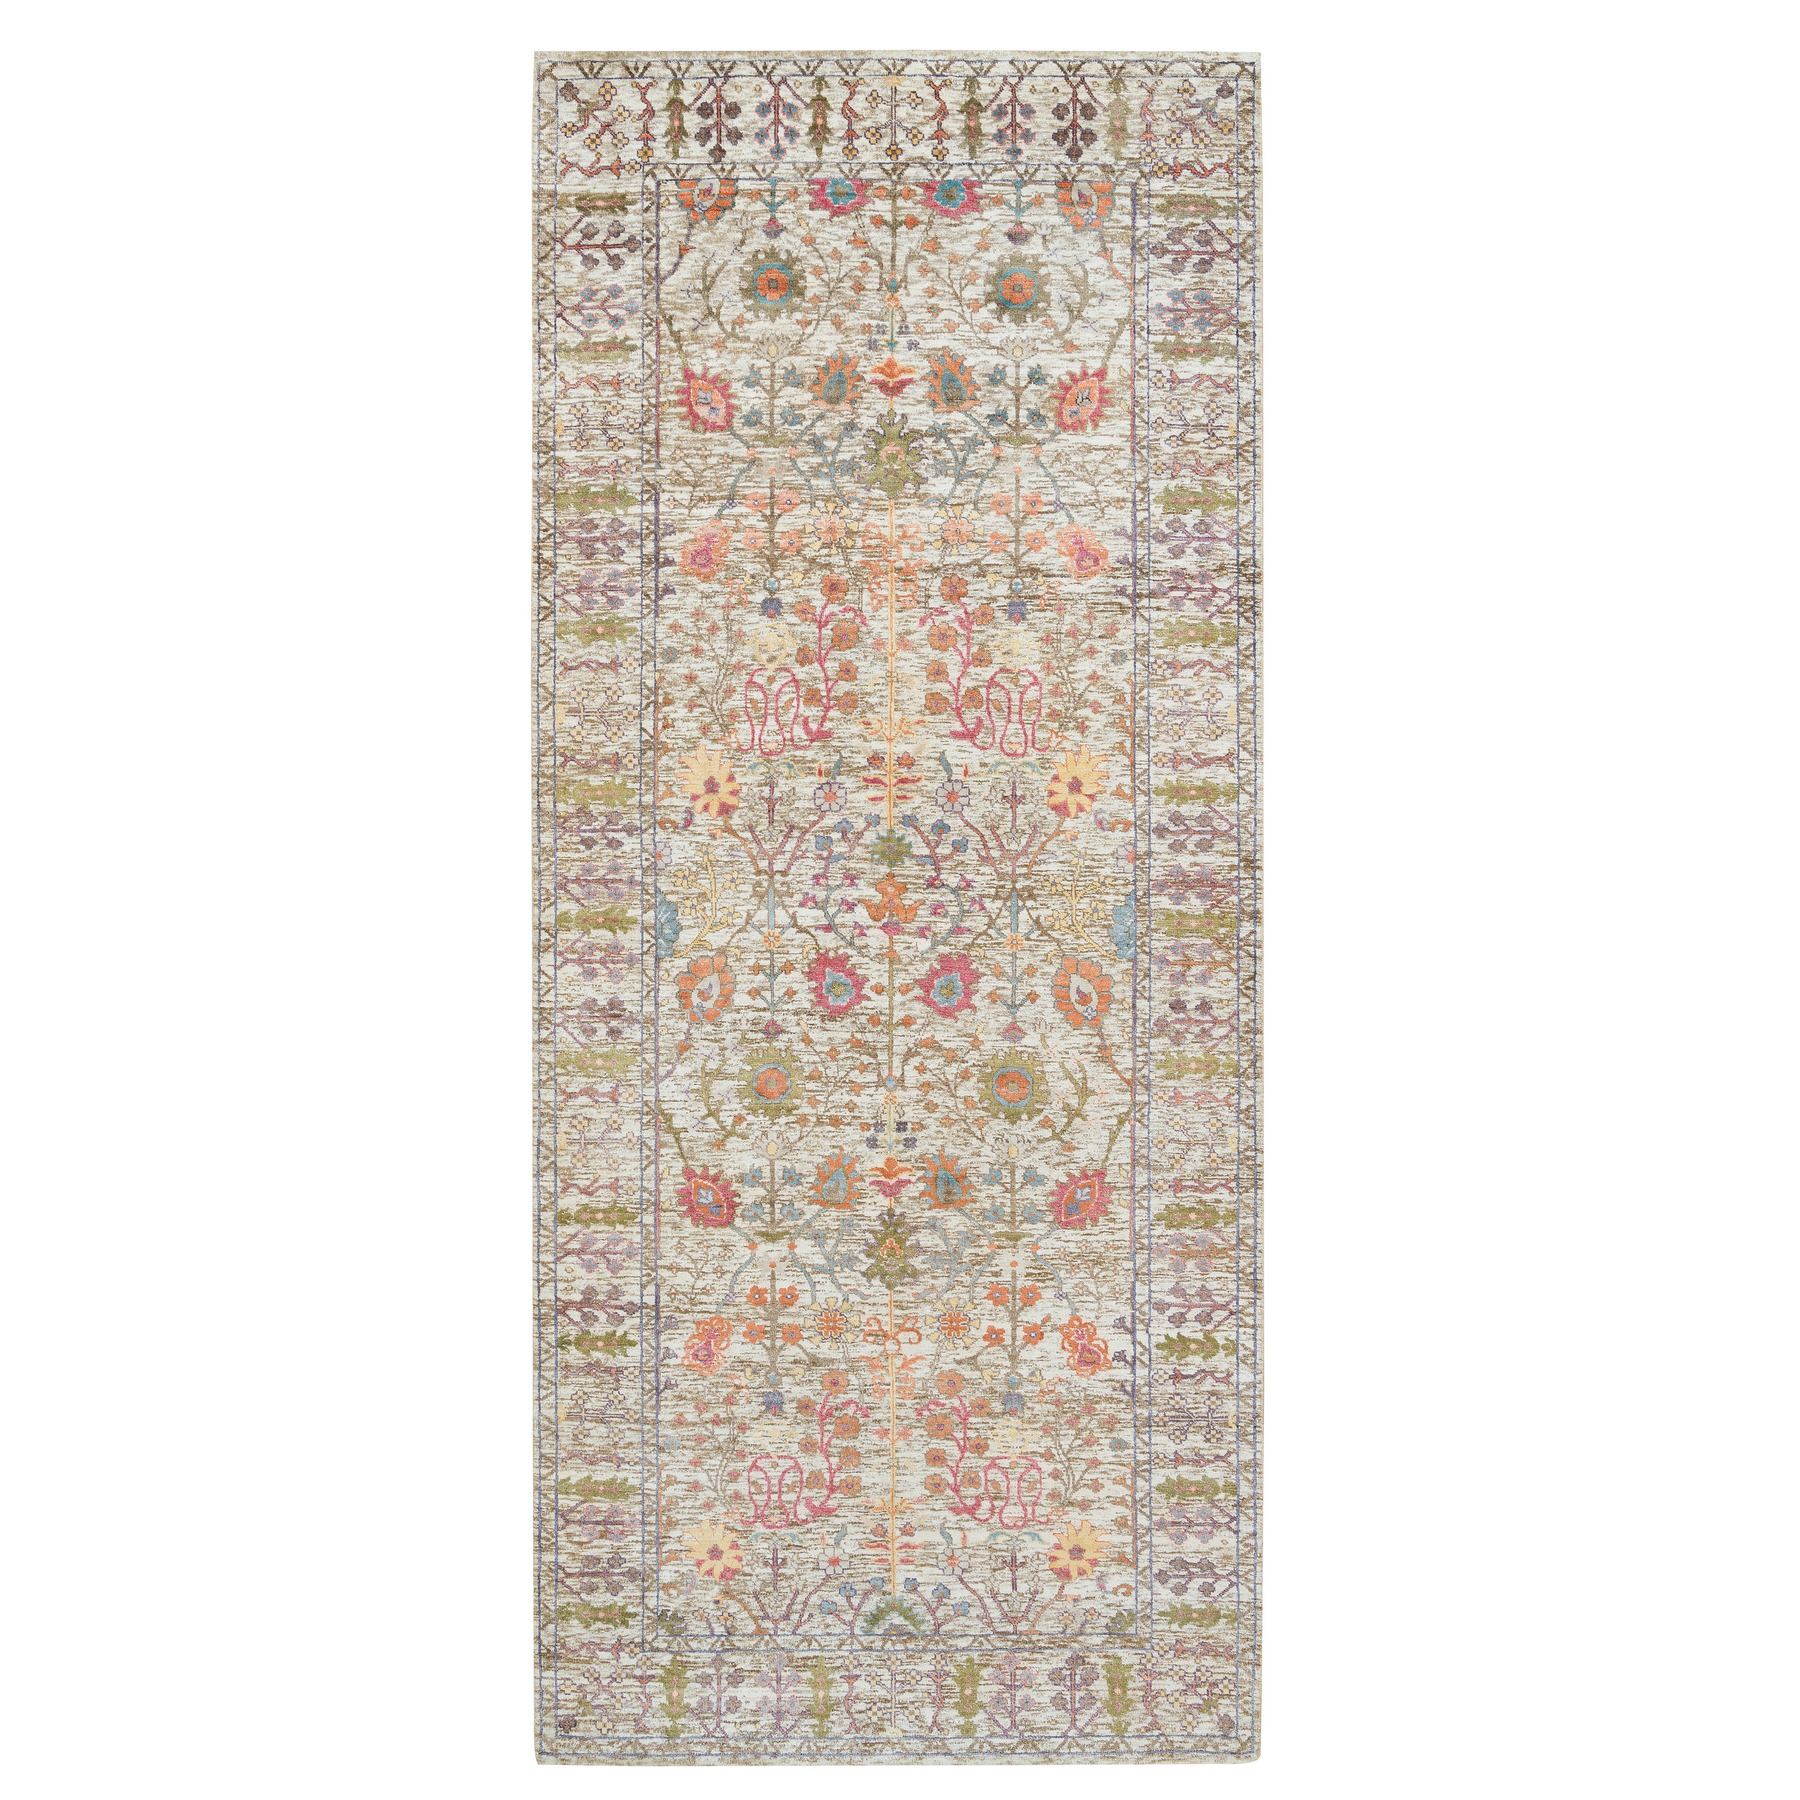 Wool and Silk Rugs LUV593208